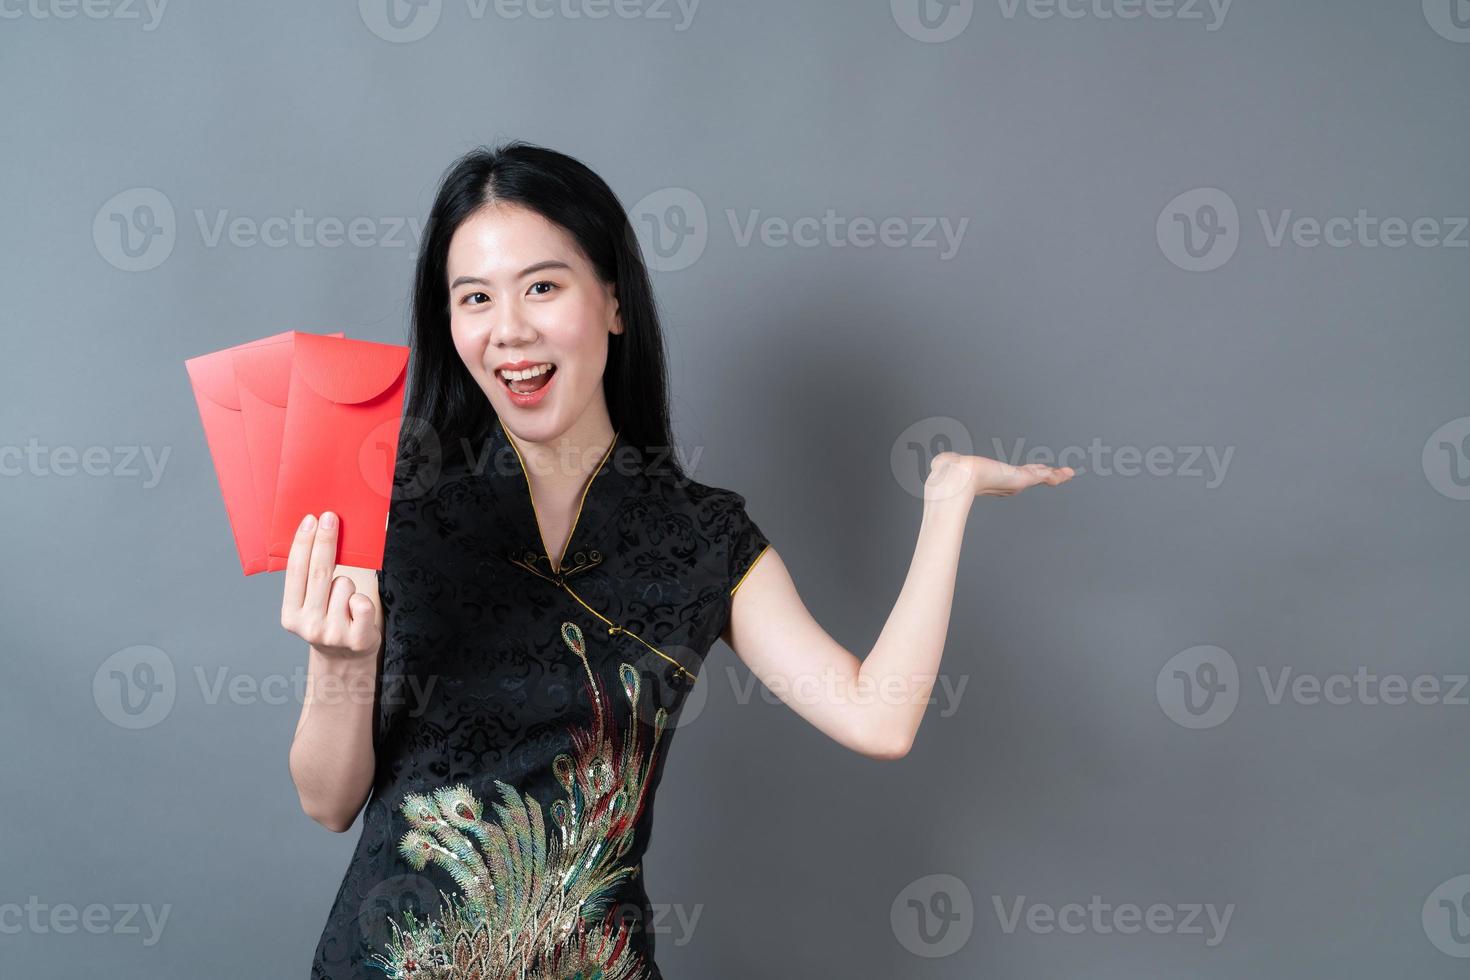 Asian woman wear Chinese traditional dress with red envelope or red packet photo